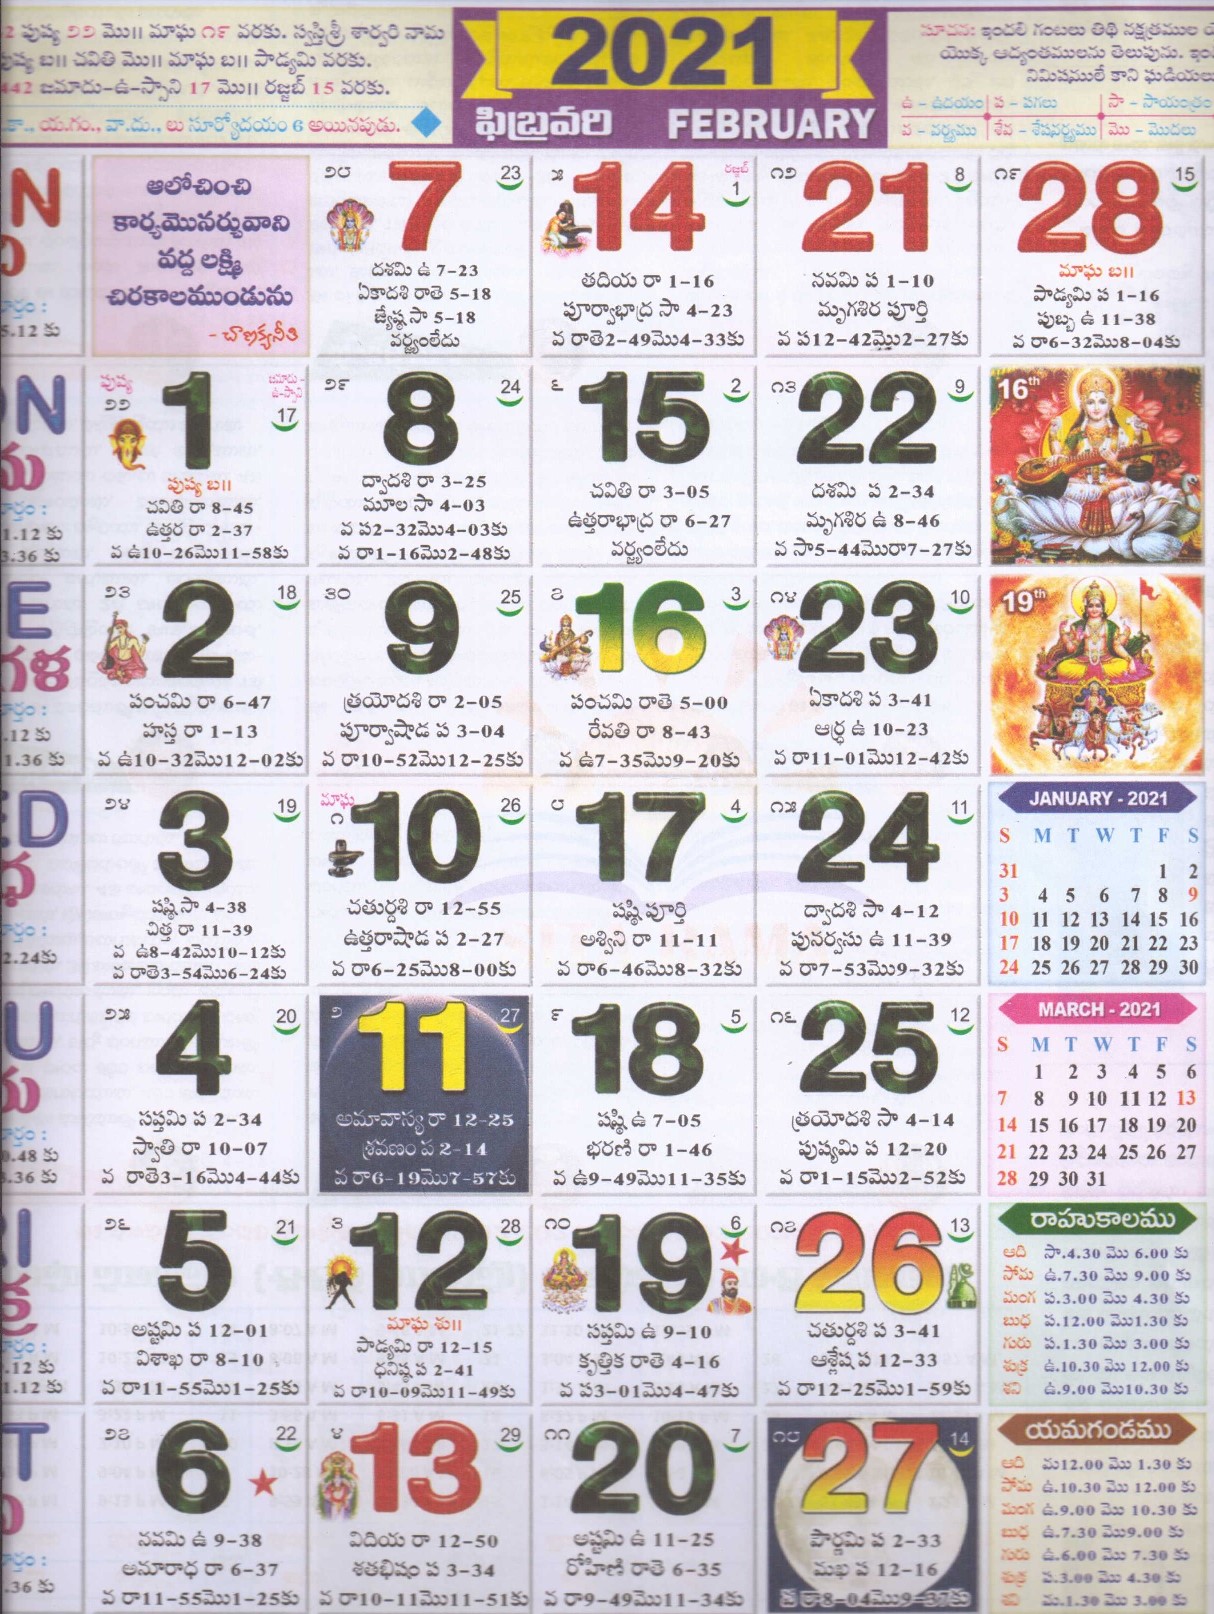 February 2021 Calendar Telugu Chinese Calendar February 2021 With Lunar Dates Holidays Auspicious Dates For Wedding Marriage Moving House Child Birth Cesarean Grand Opening Keviasli Below is our 2021 yearly calendar for india with public holidays highlighted in red and today's date covered in green. keviasli